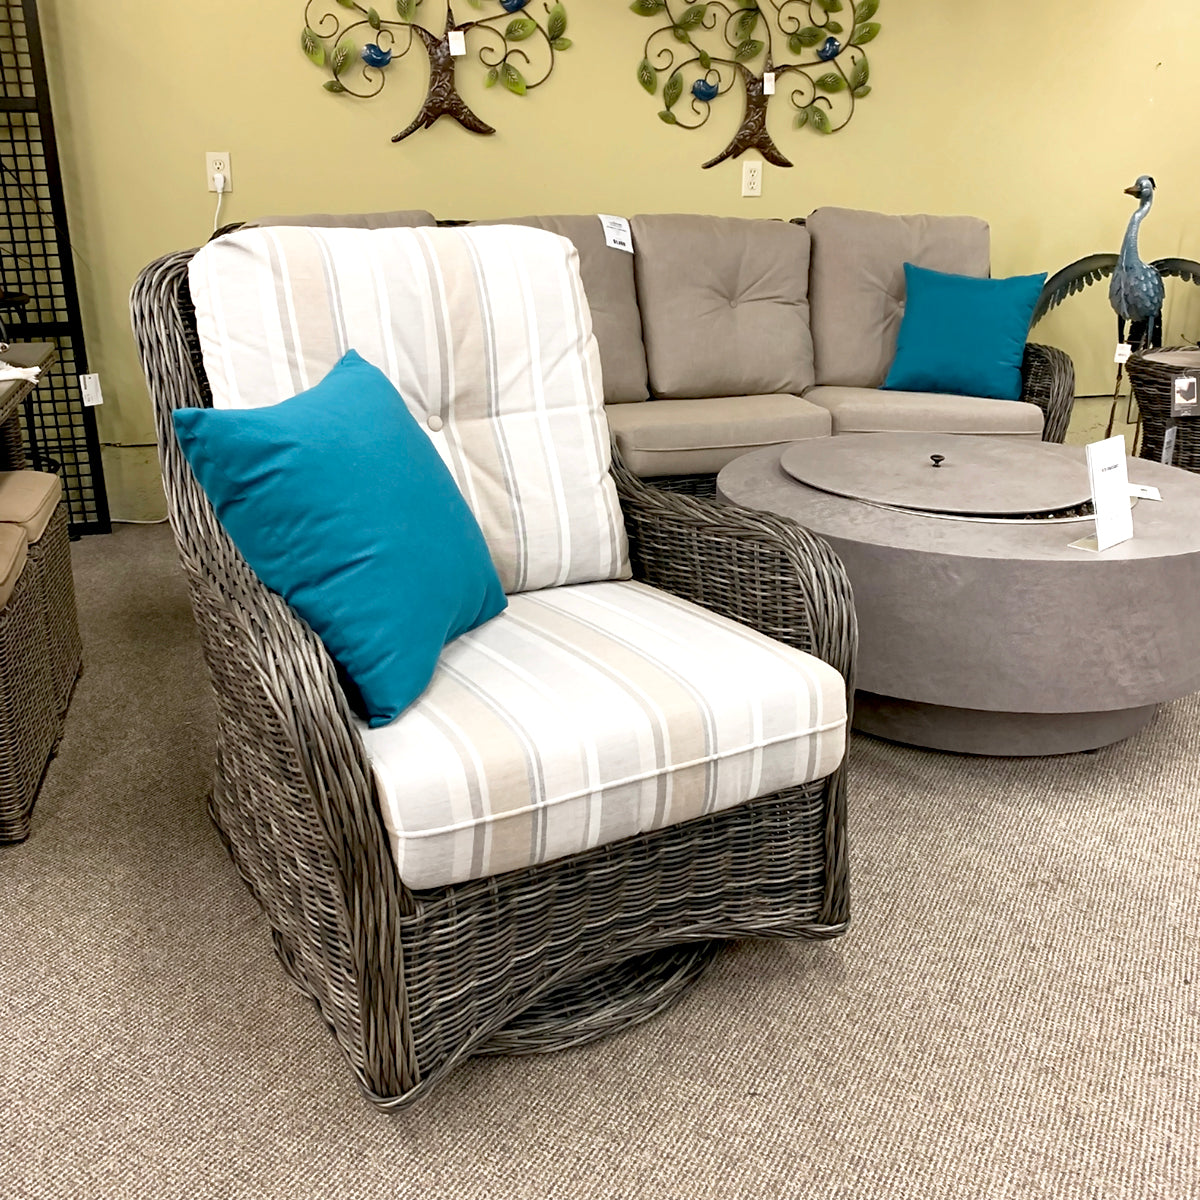 Shop Local Spokane Valley, WA for the best resin wicker outdoor patio lounge Swivel Glider chairs from Patio Renaissance available at Jacobs Custom Living in Spokane Valley, WA 